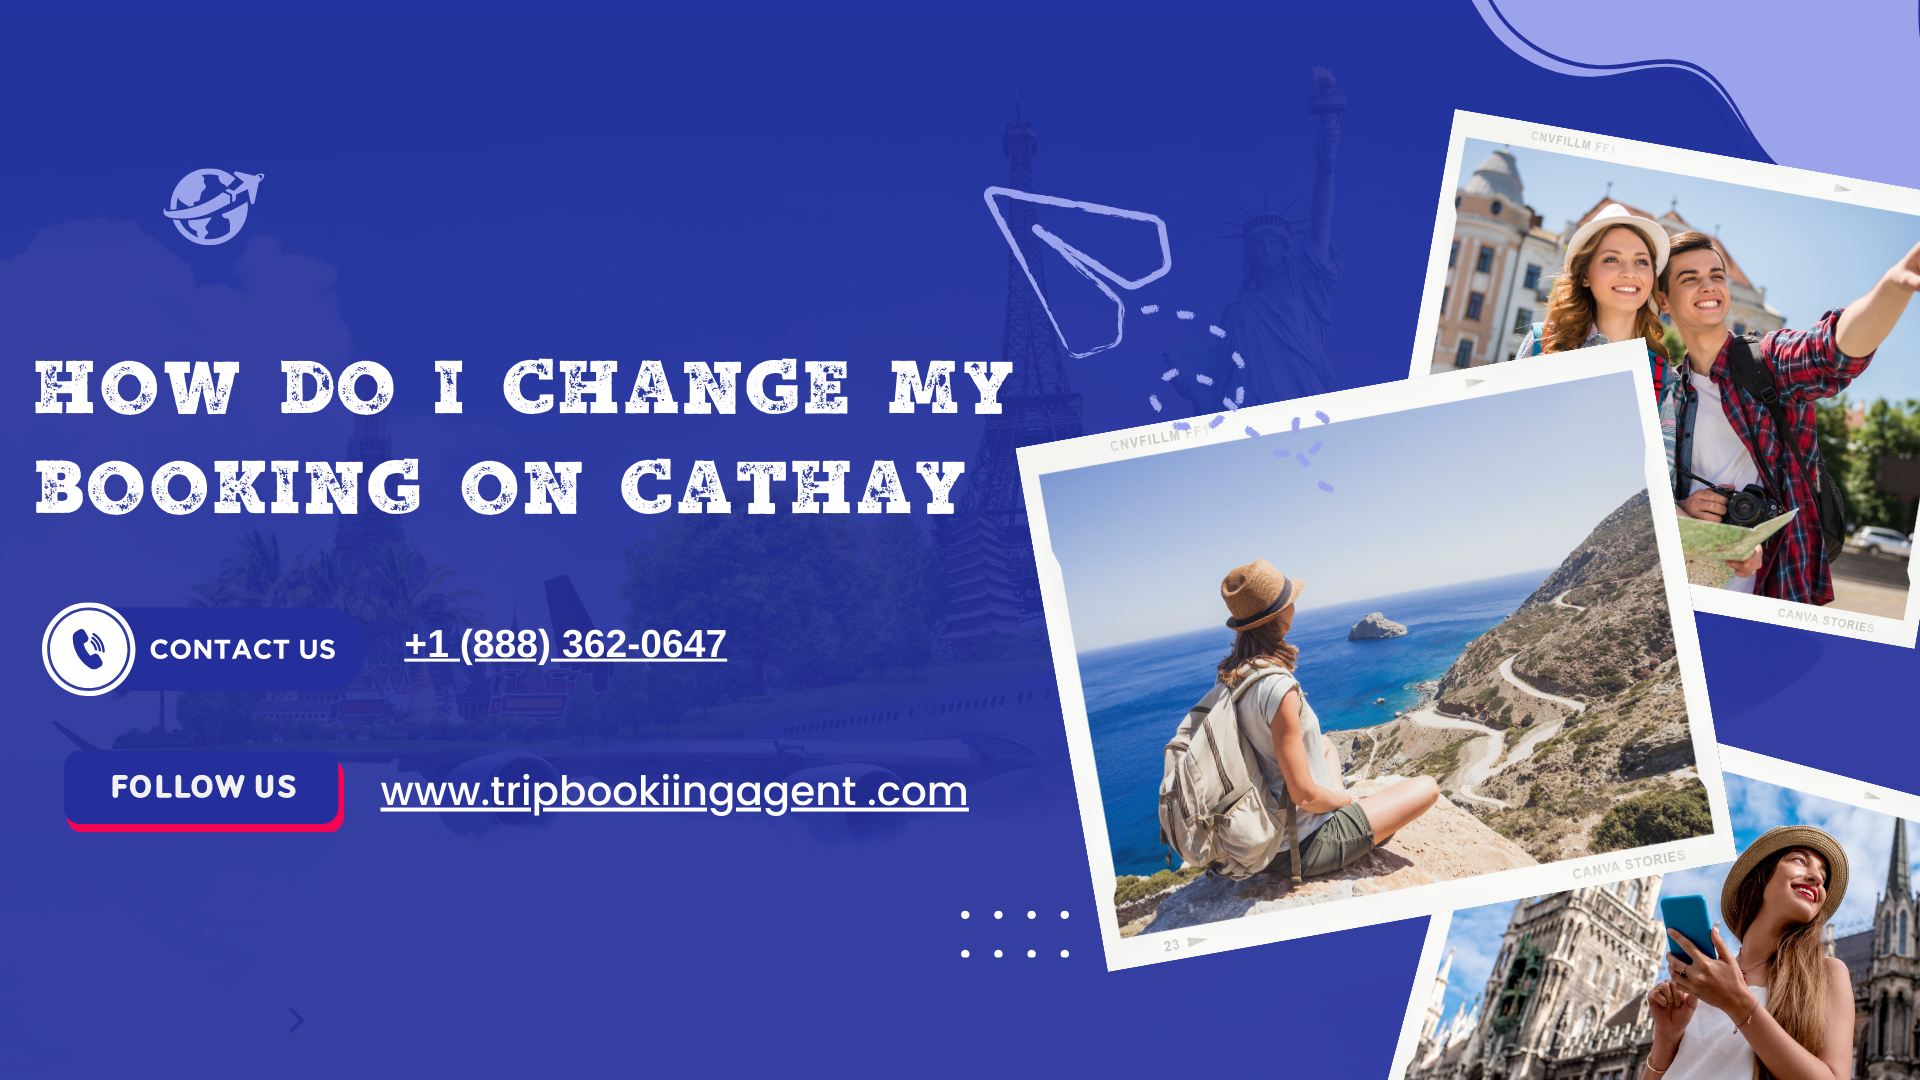 How Do I Change My Booking On Cathay?